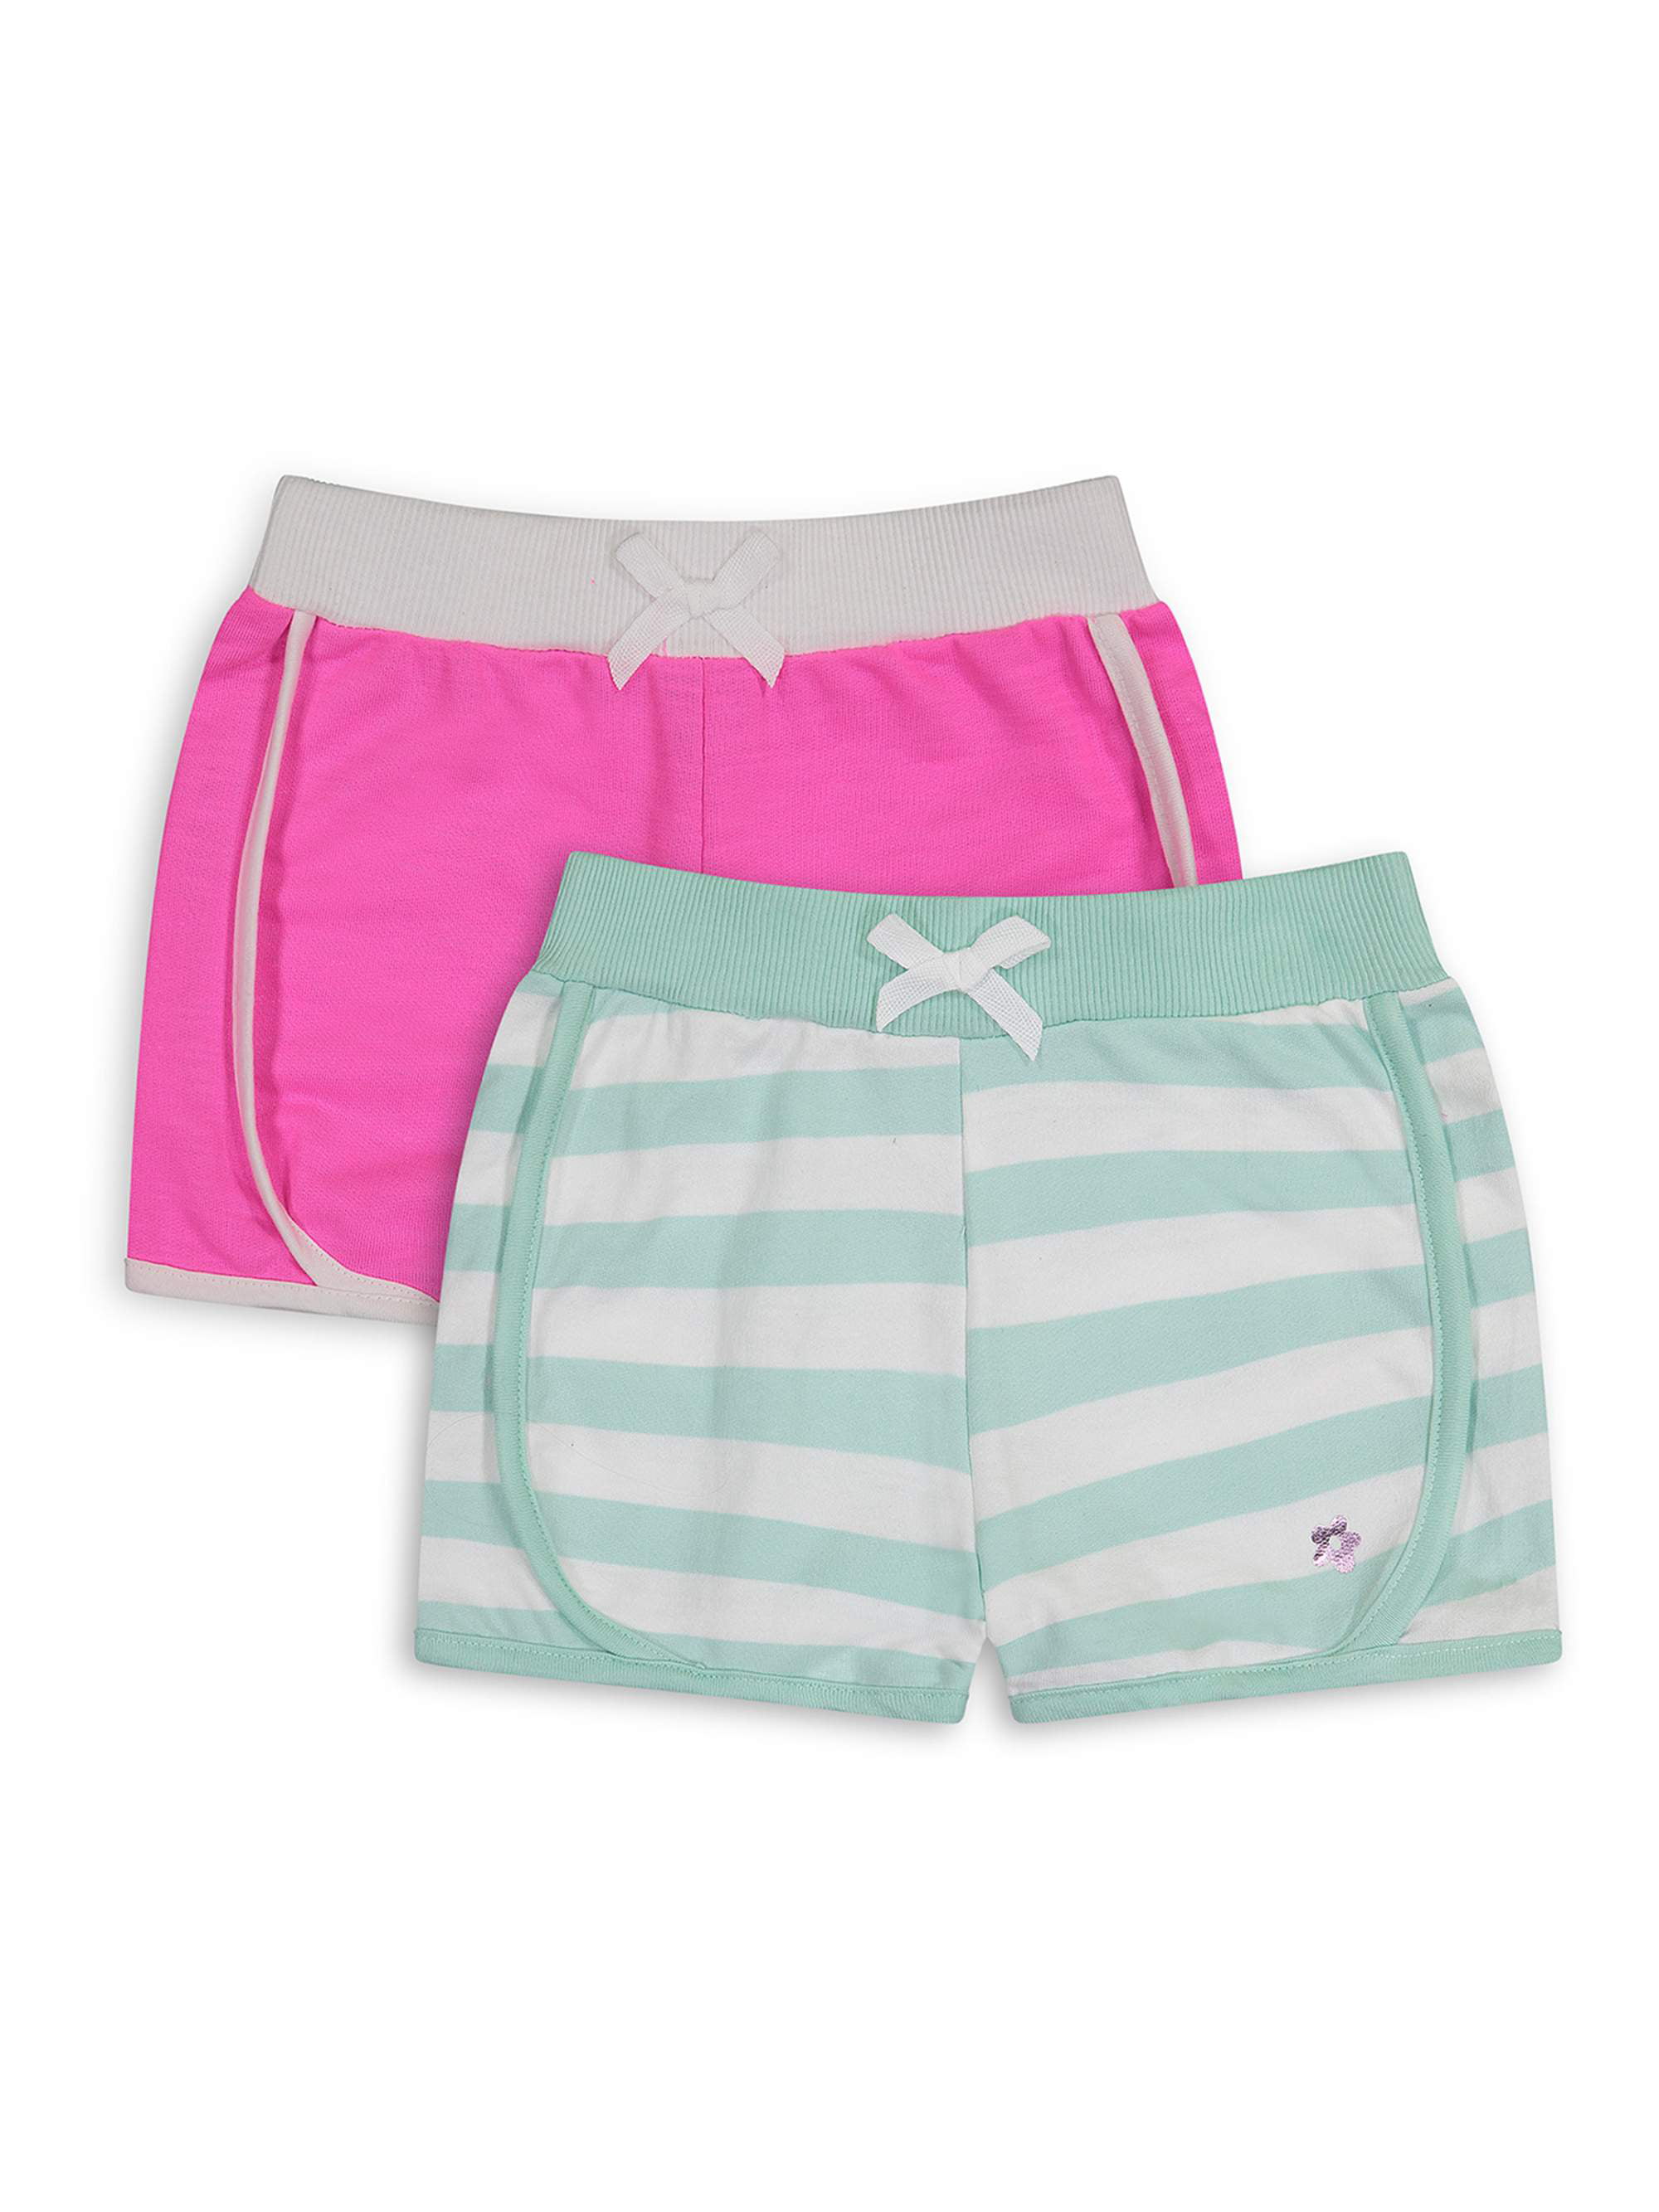 Limited Too Girls Stripe and Solid Dolphin Shorts, 2-Pack, Sizes 4-16 ...